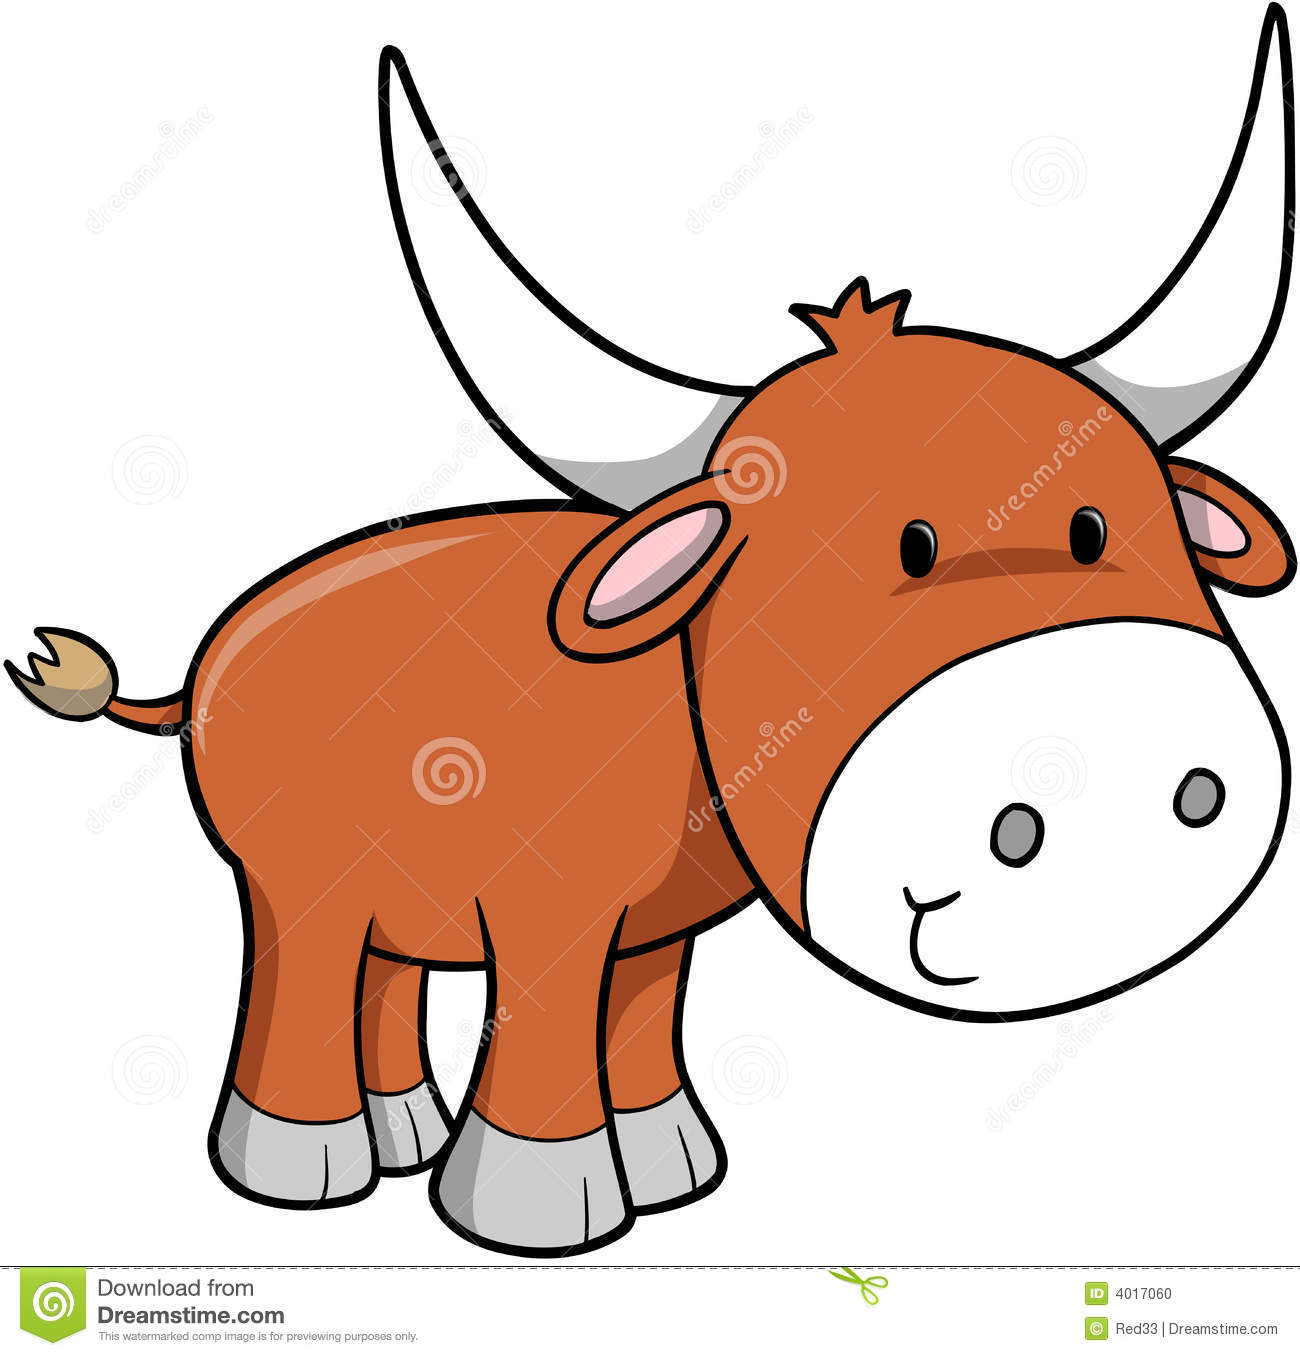 Muskox clipart #2, Download drawings